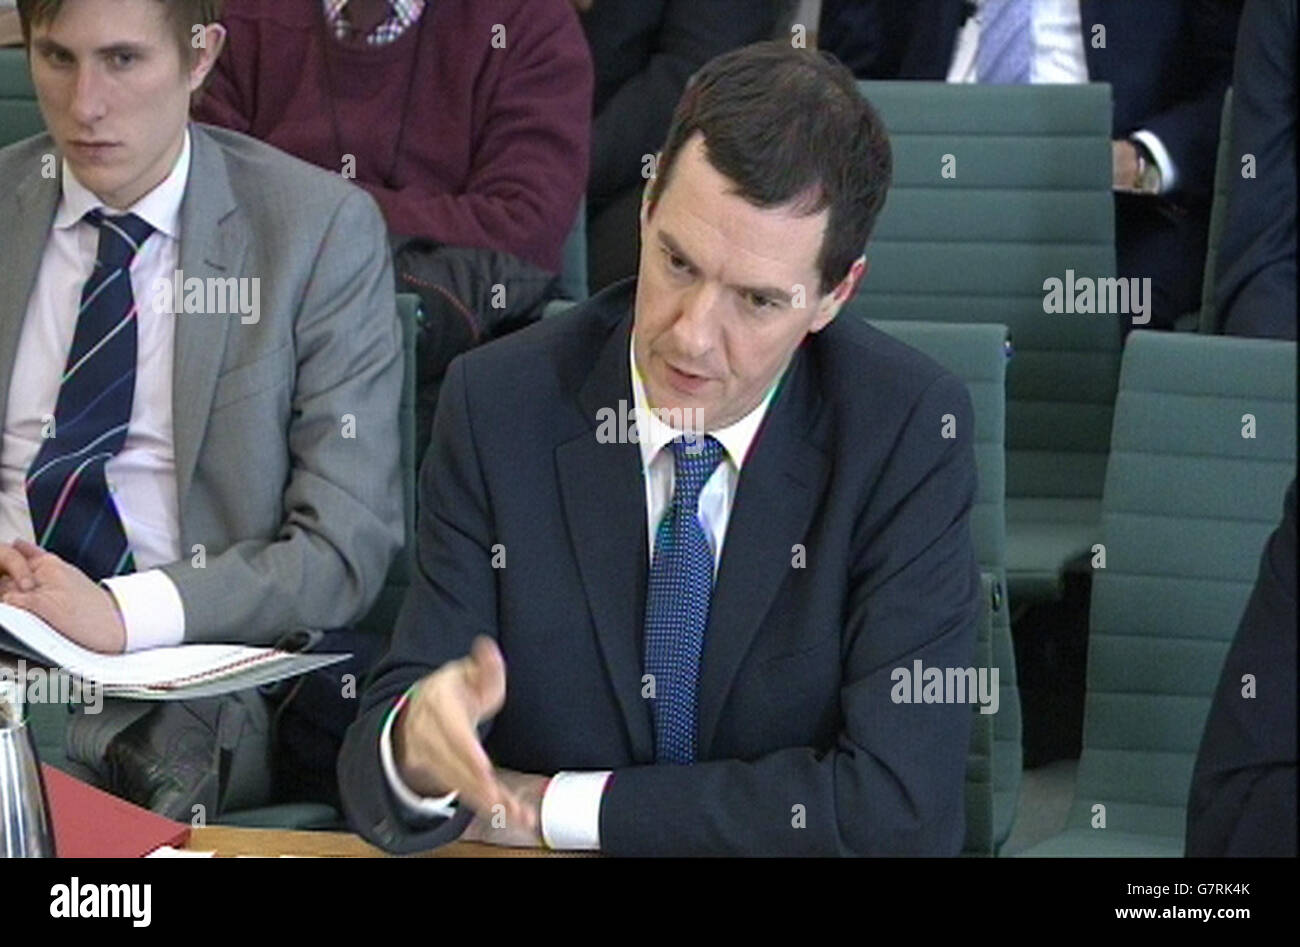 Chancellor of the Exchequer George Osborne answers questions in front of the Treasury Select Committee in the House of Commons, London on the subject of Budget 2015. Stock Photo